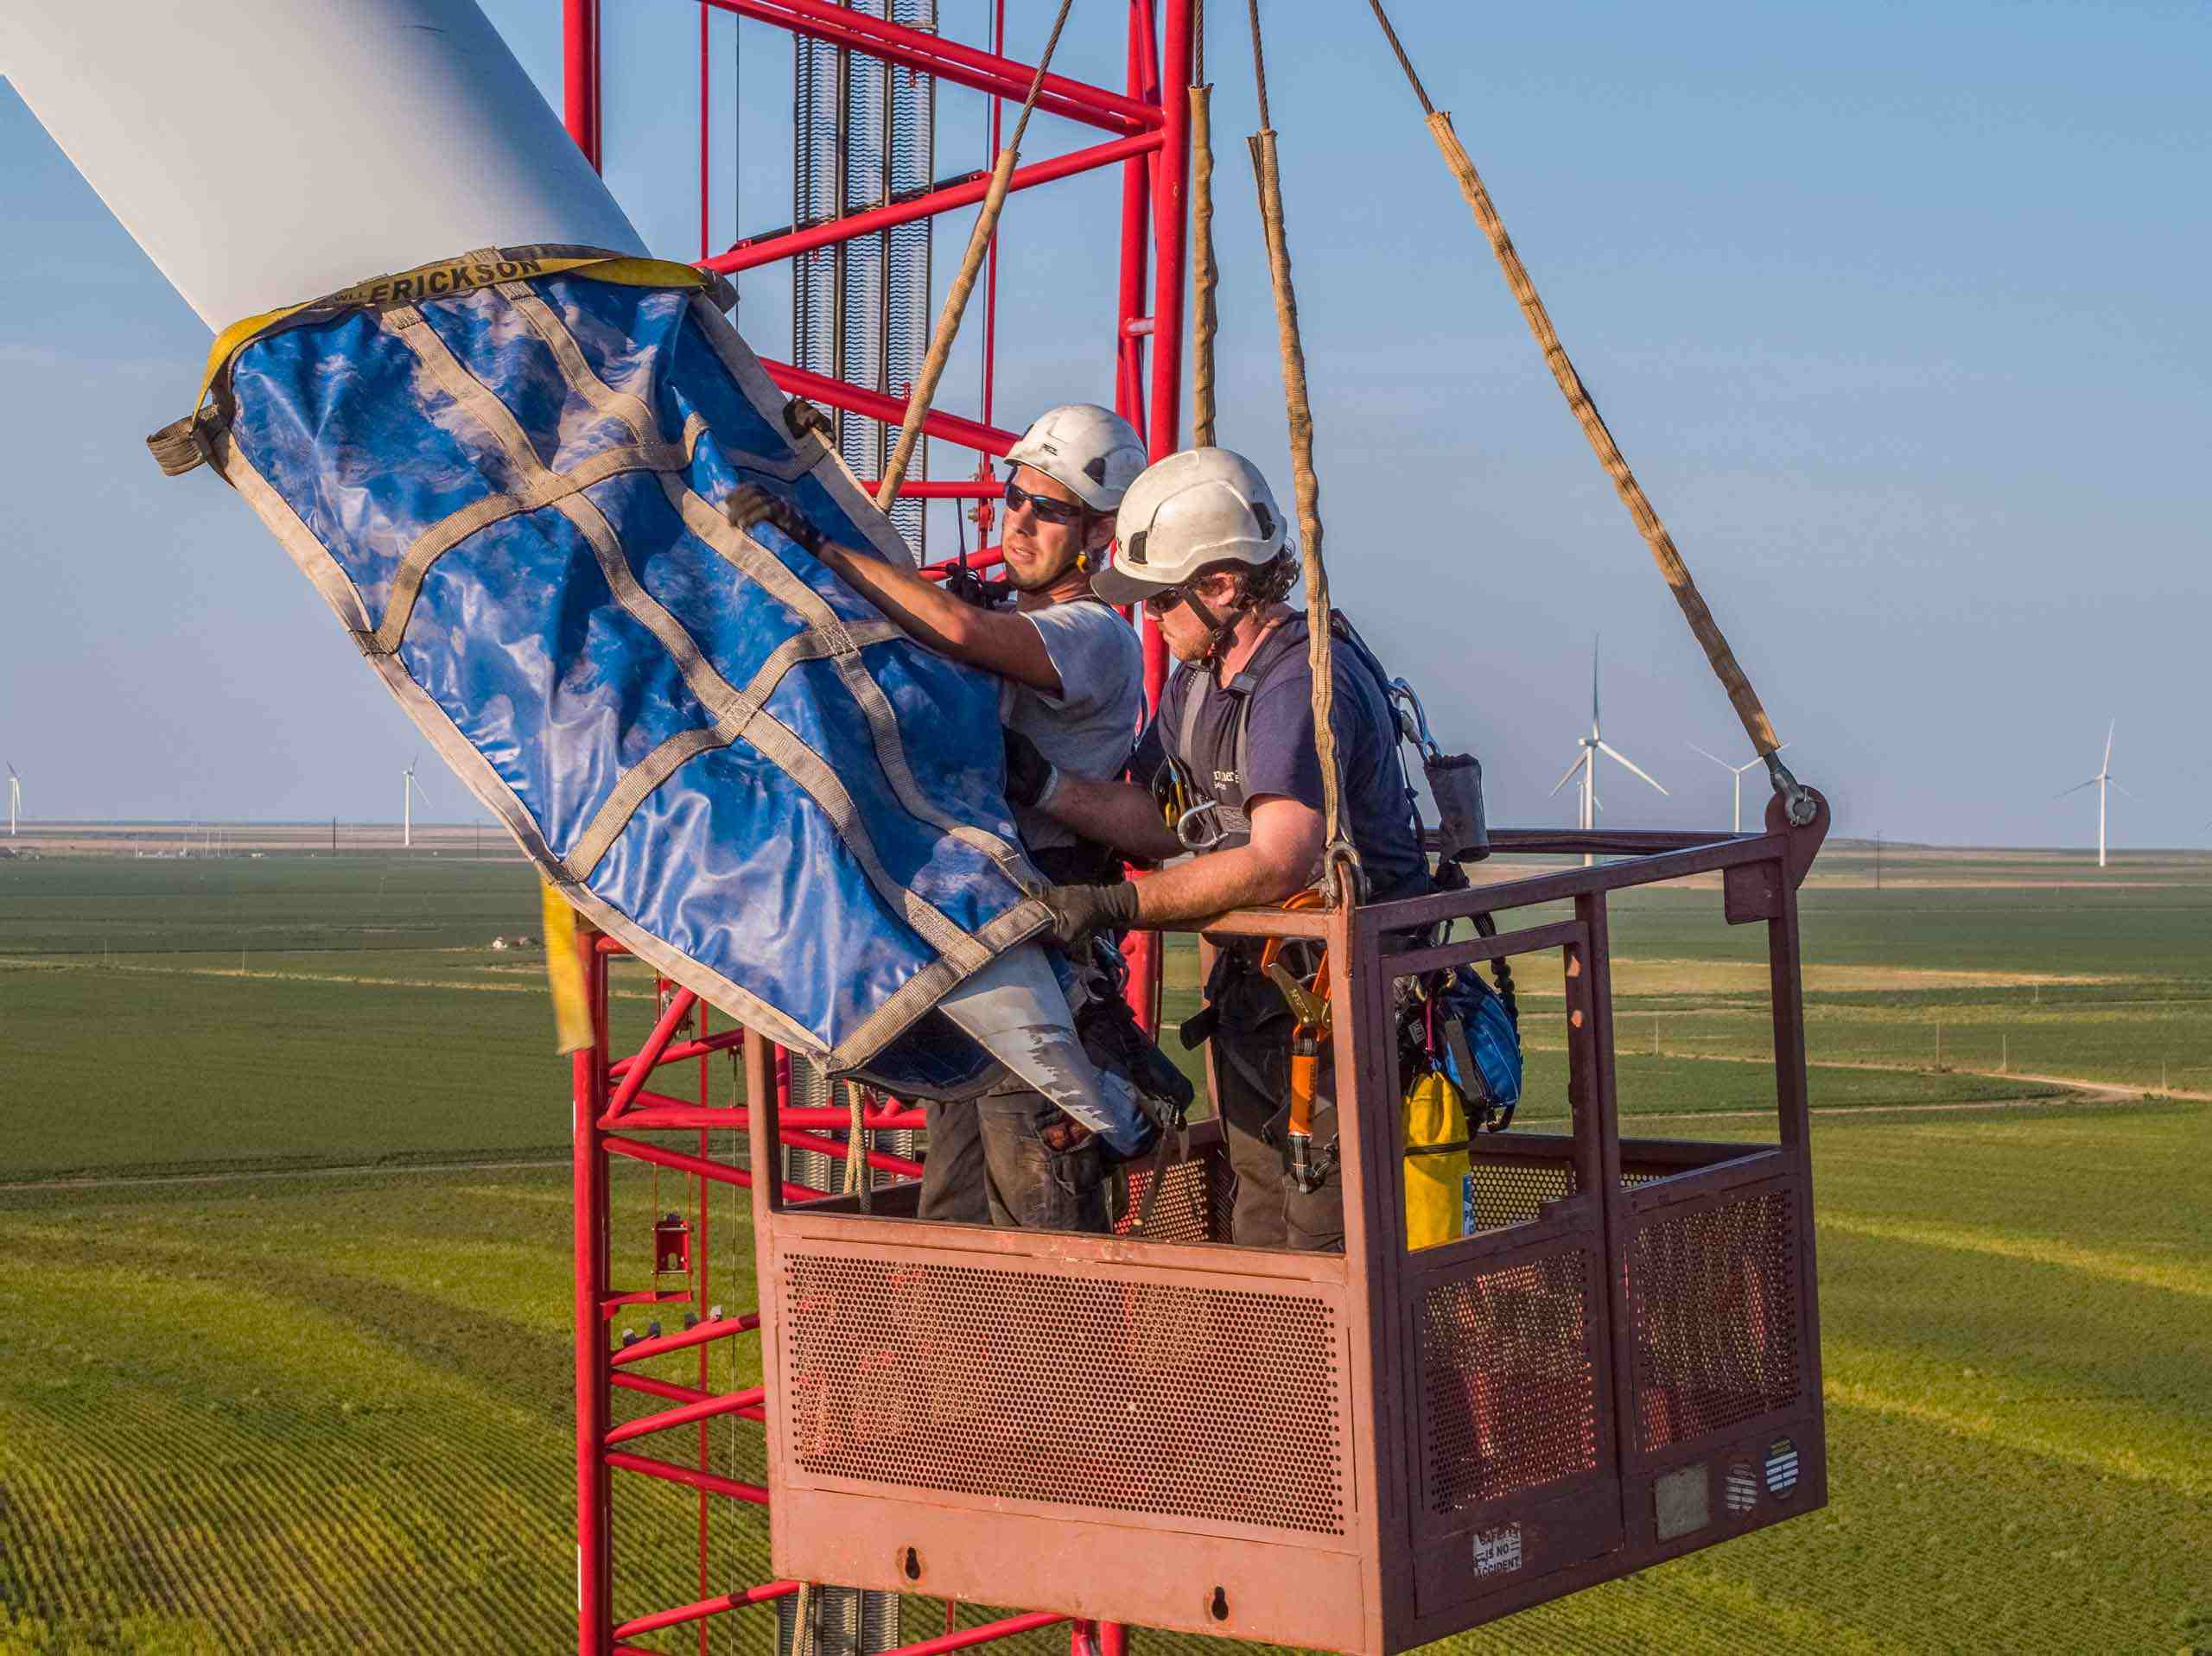 Best arial photography of wind farm techs